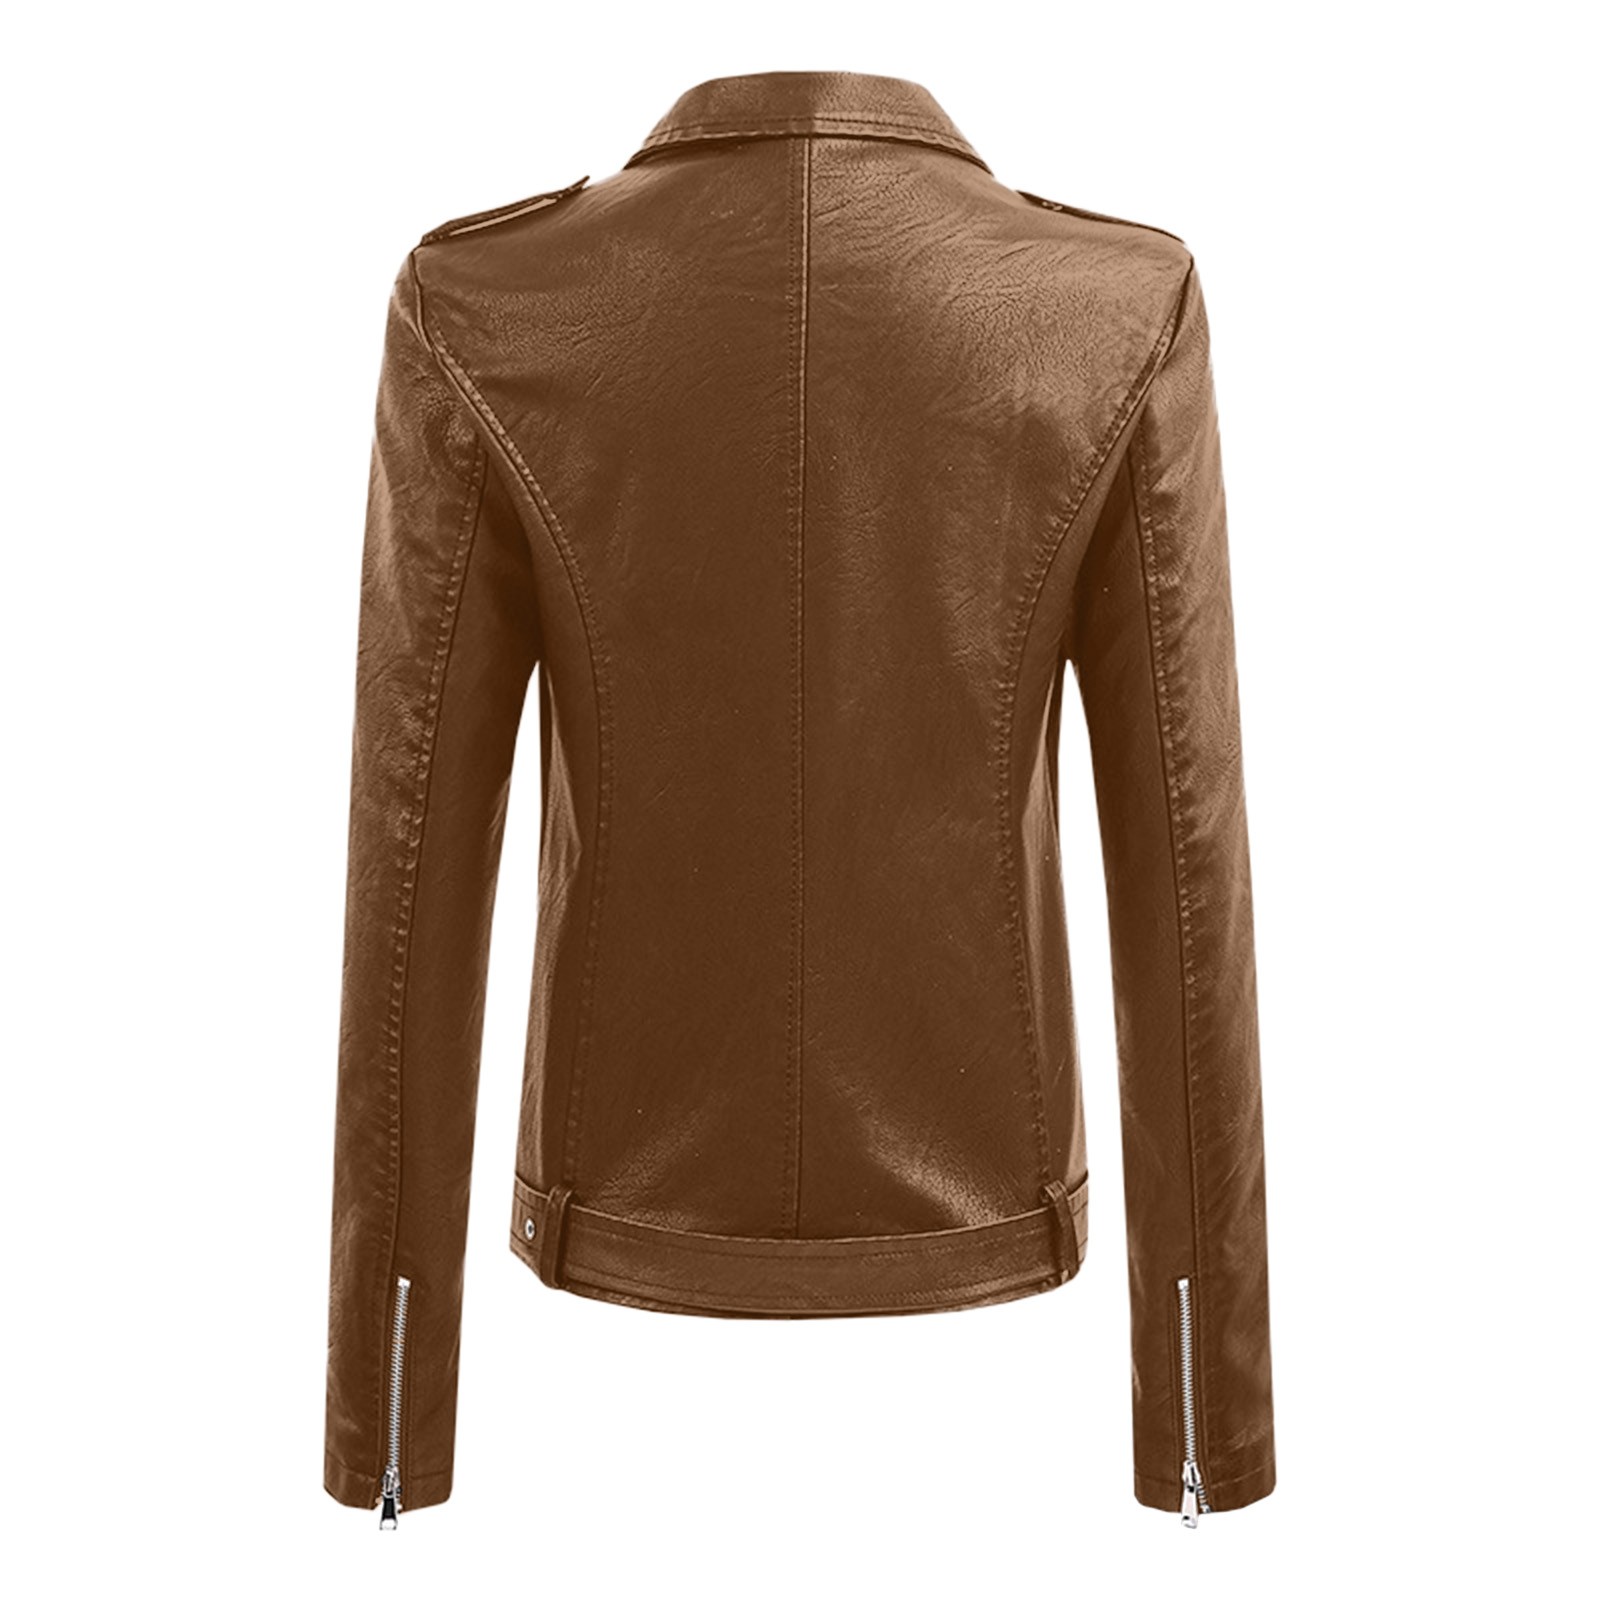 Pgeraug Jackets for Women Womens Long Sleeve Leather Jacket Motorcycle Leather Jacket Pu Leather Jacket Womens Jacket Leather Jacket Women Brown 2Xl - image 5 of 5